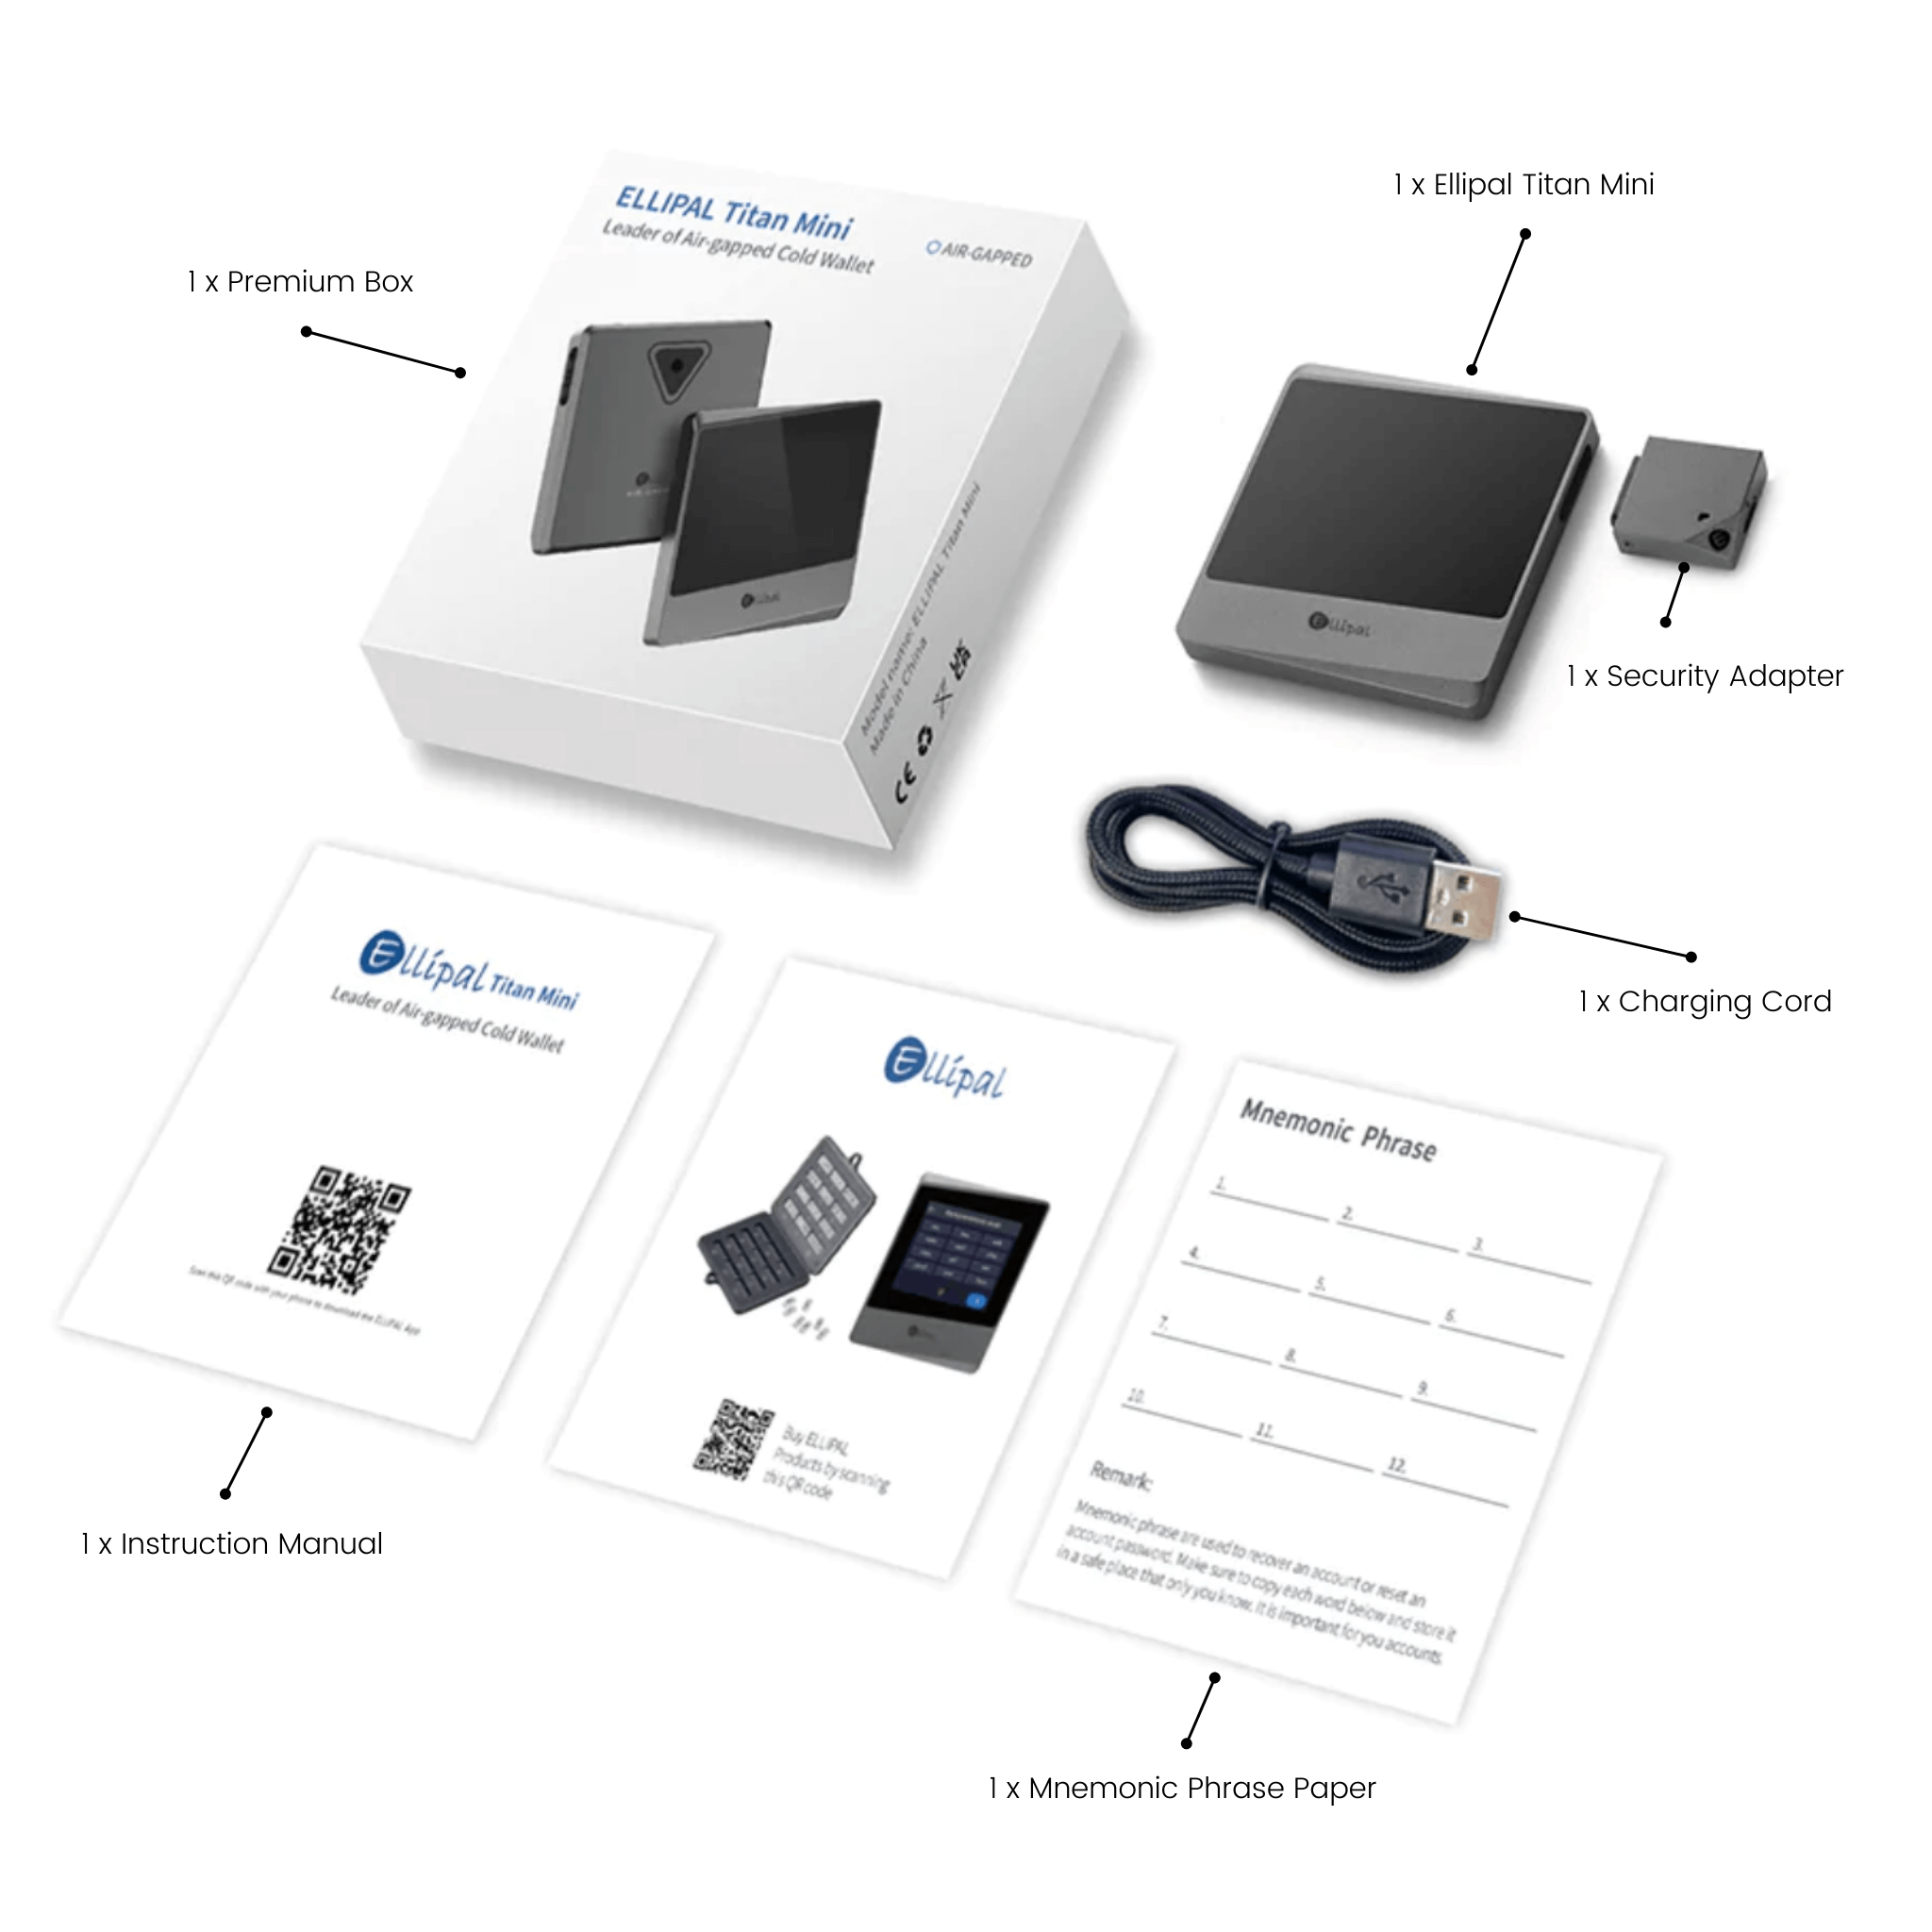 Ellipal Titan Mini Grey Cryptocurrency Hardware Wallet Package Contents